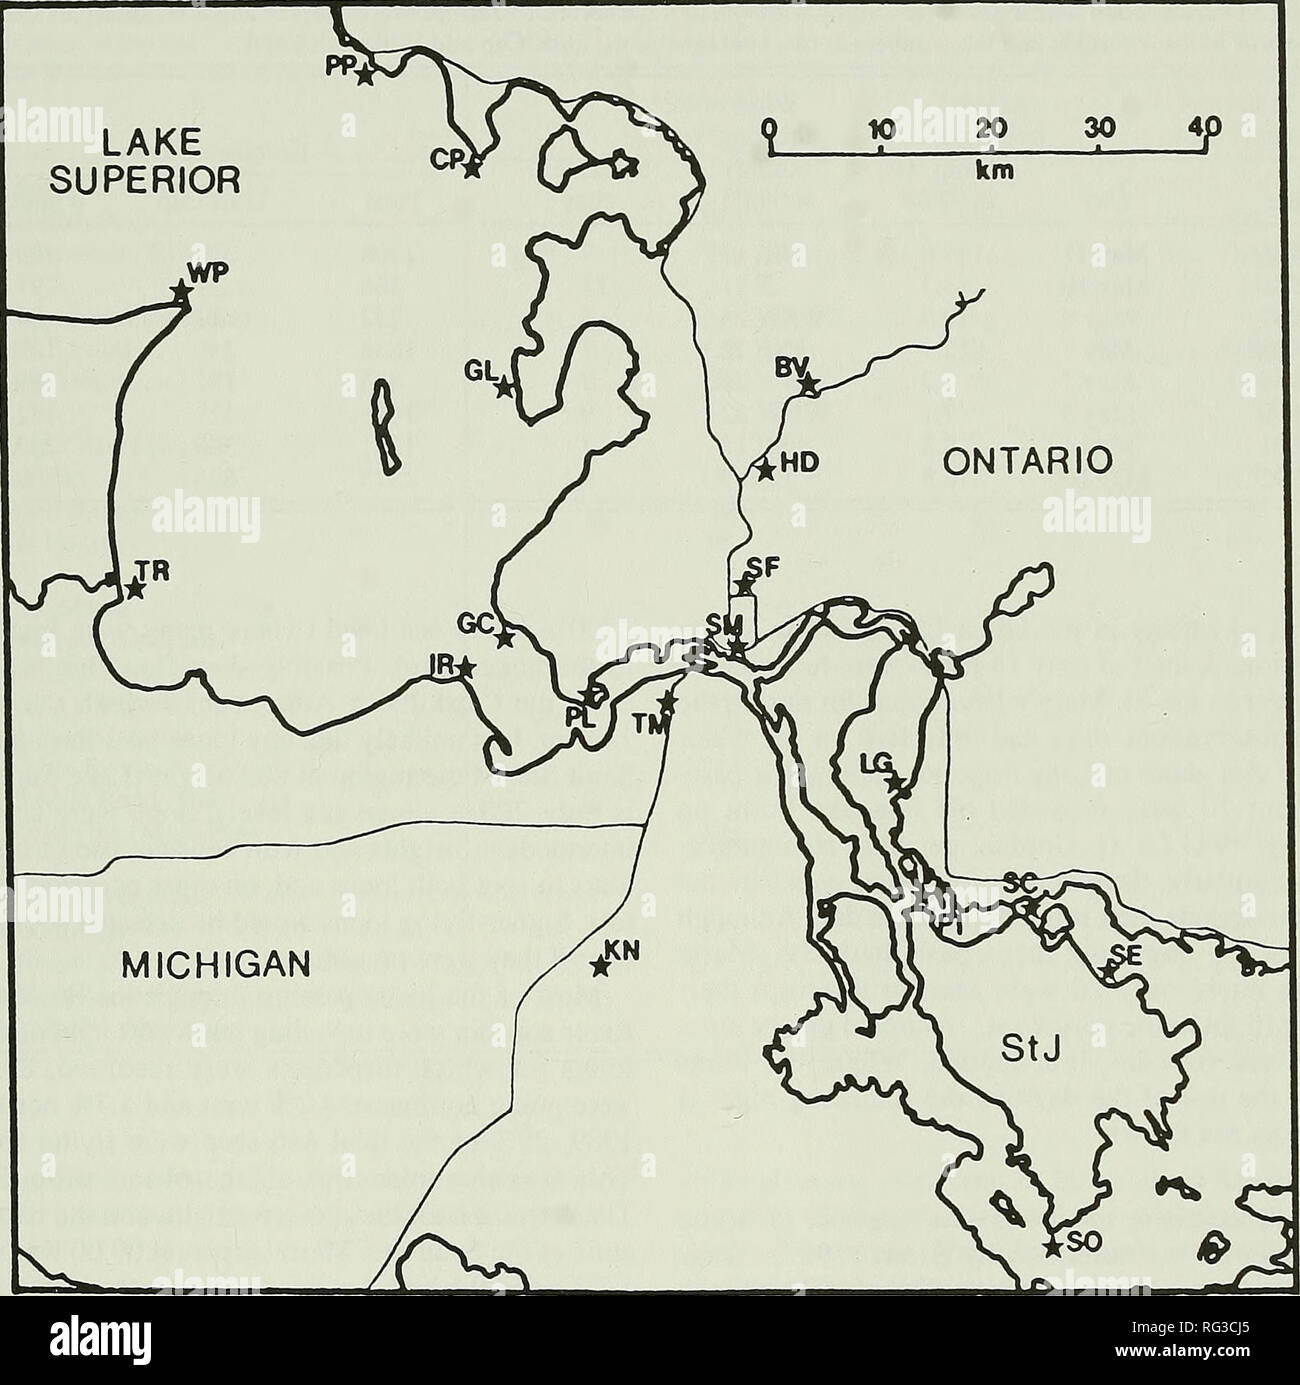 . The Canadian field-naturalist. 1993 Sanders: Spring Migration Routes of Common Loons 197 LAKE SUPERIOR 10 20 30. Figure 1. Map of the Sault Ste. Marie region of the Great Lakes, showing the location of the observation sites from which loon migration was recorded. See Table 3 for names corresponding to the abbreviations. breeding plumage, with the exception of four loons passing Gros Cap in 1990 and three flying up the St. Mary's River past Sault Ste. Marie in 1992, which were identified as Red-throated Loons. Of 4838 loons recorded by Ewert (1982) passing Whitefish Point in 1982, only 18 wer Stock Photo